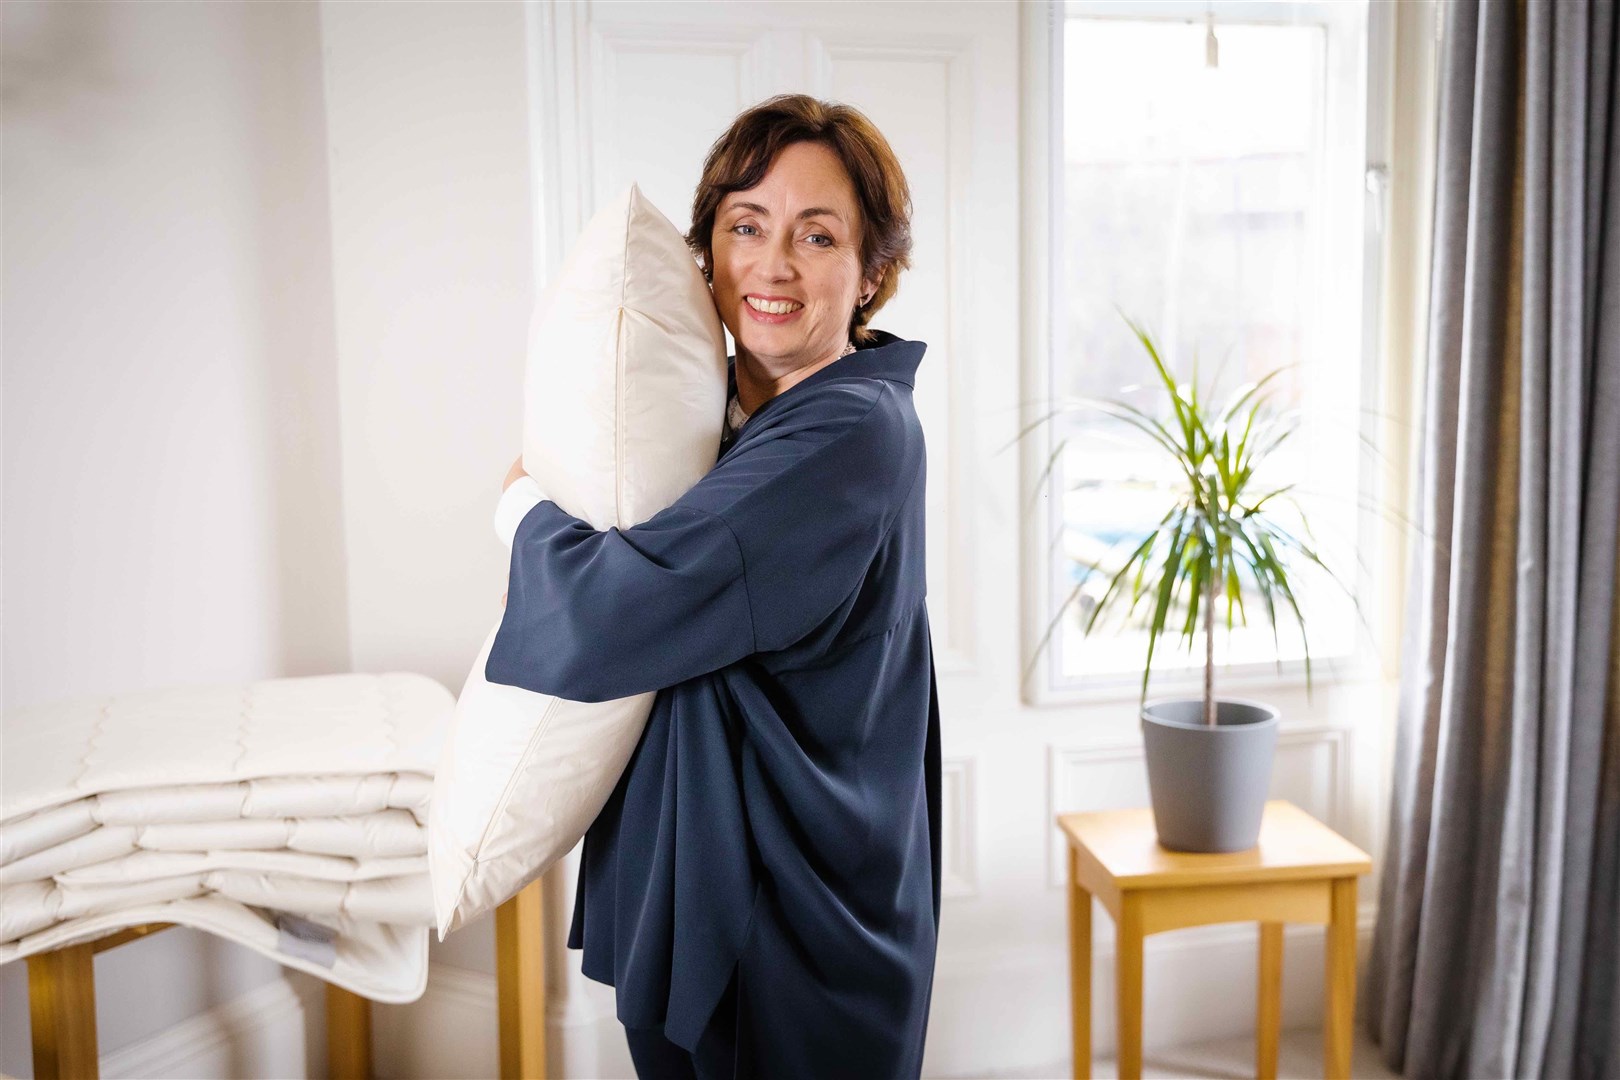 Joan Johnston, founder and managing director of Elgin's Bespoke Fabrics, which produces the Ava Innes range of duvets and pillows.